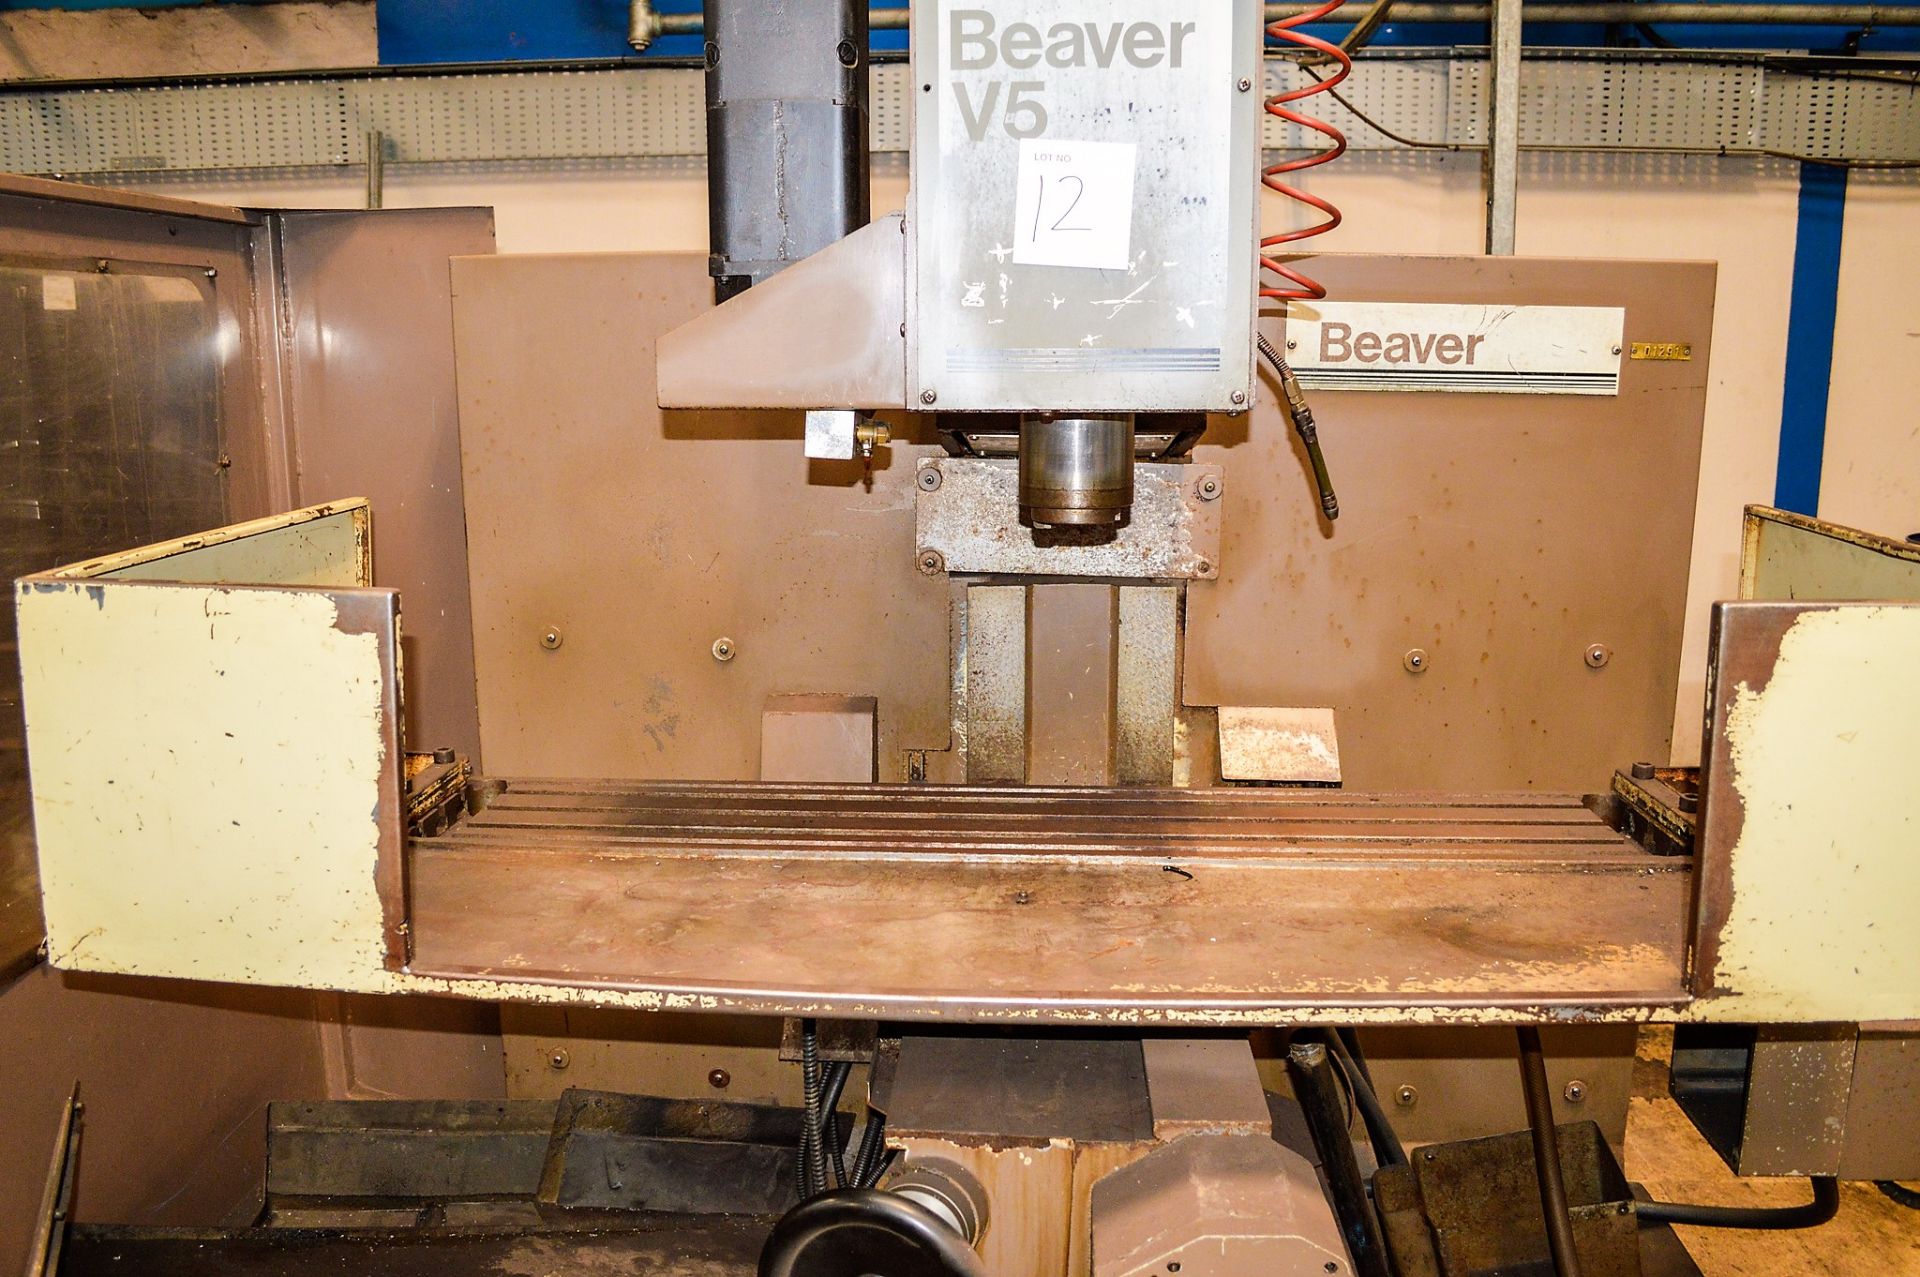 Beaver V5 CNC vertical milling machine S/N: 15157 c/w 48 inch x 10 inch table & Fanuc controls - Image 5 of 5